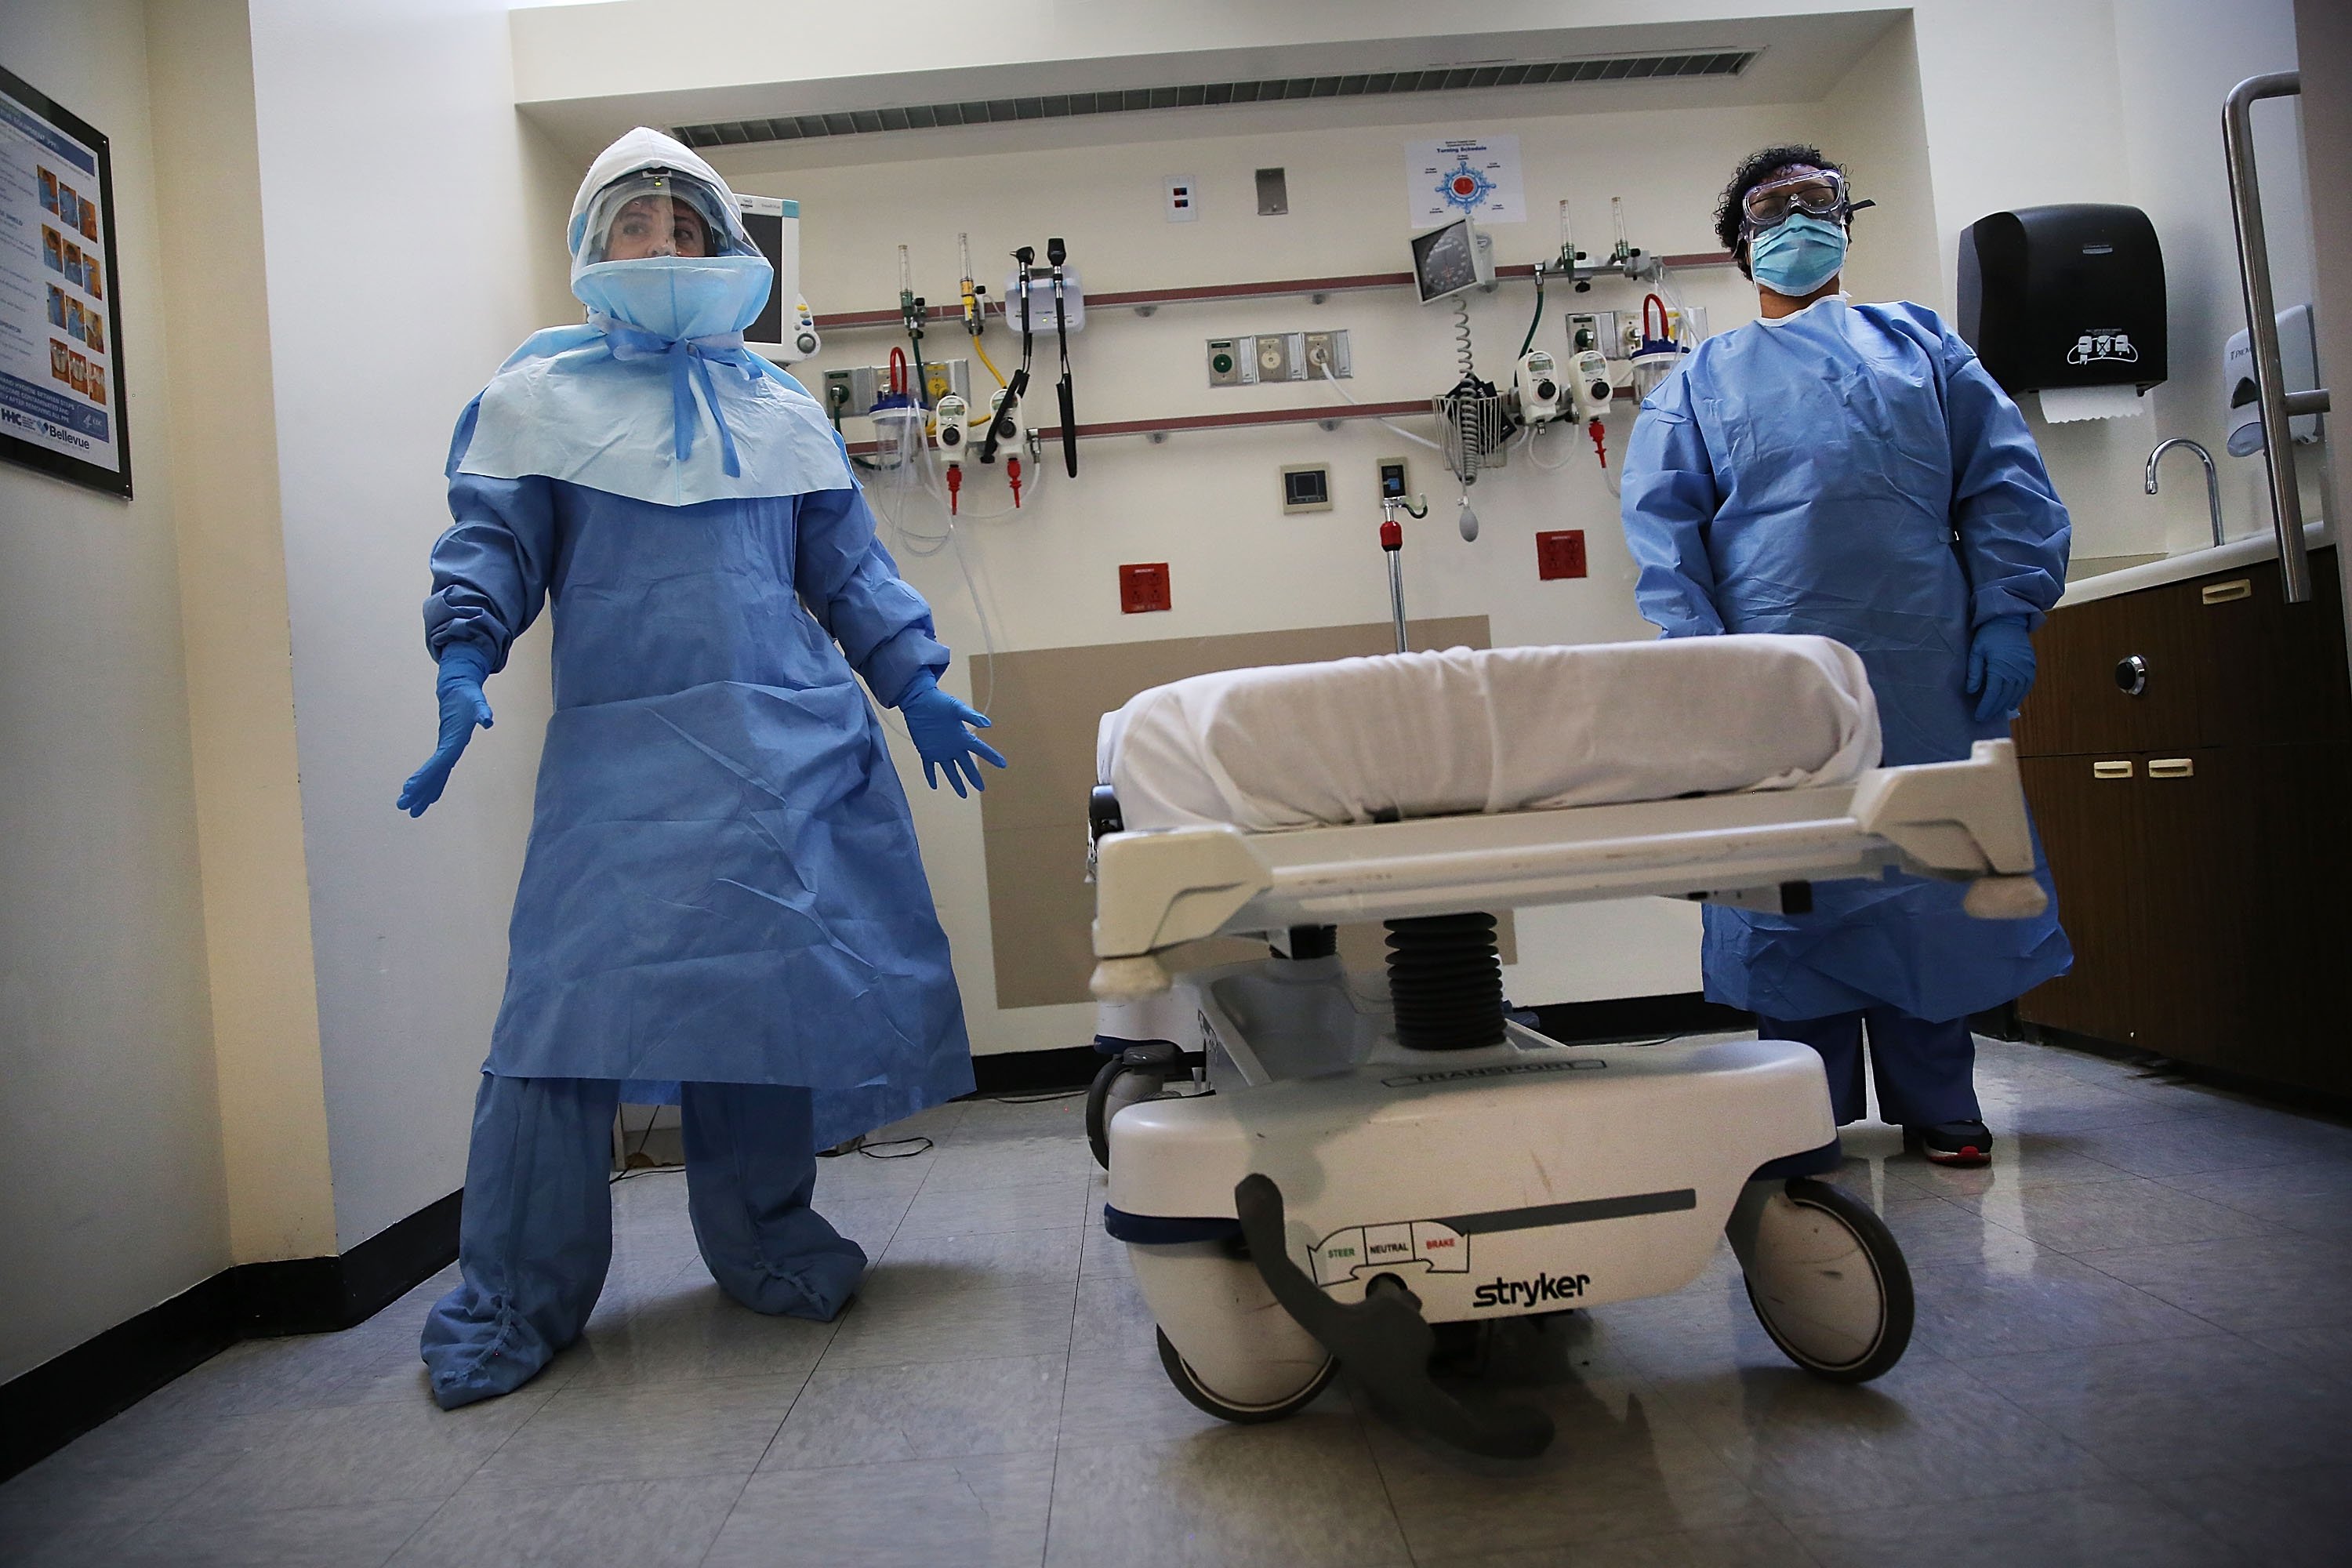 Members of Bellevue Hospital staff wear protective clothing as they demonstrate how they would receive a suspected Ebola patient on Oct. 8, 2014 in New York City. (Spencer Platt—Getty Images)